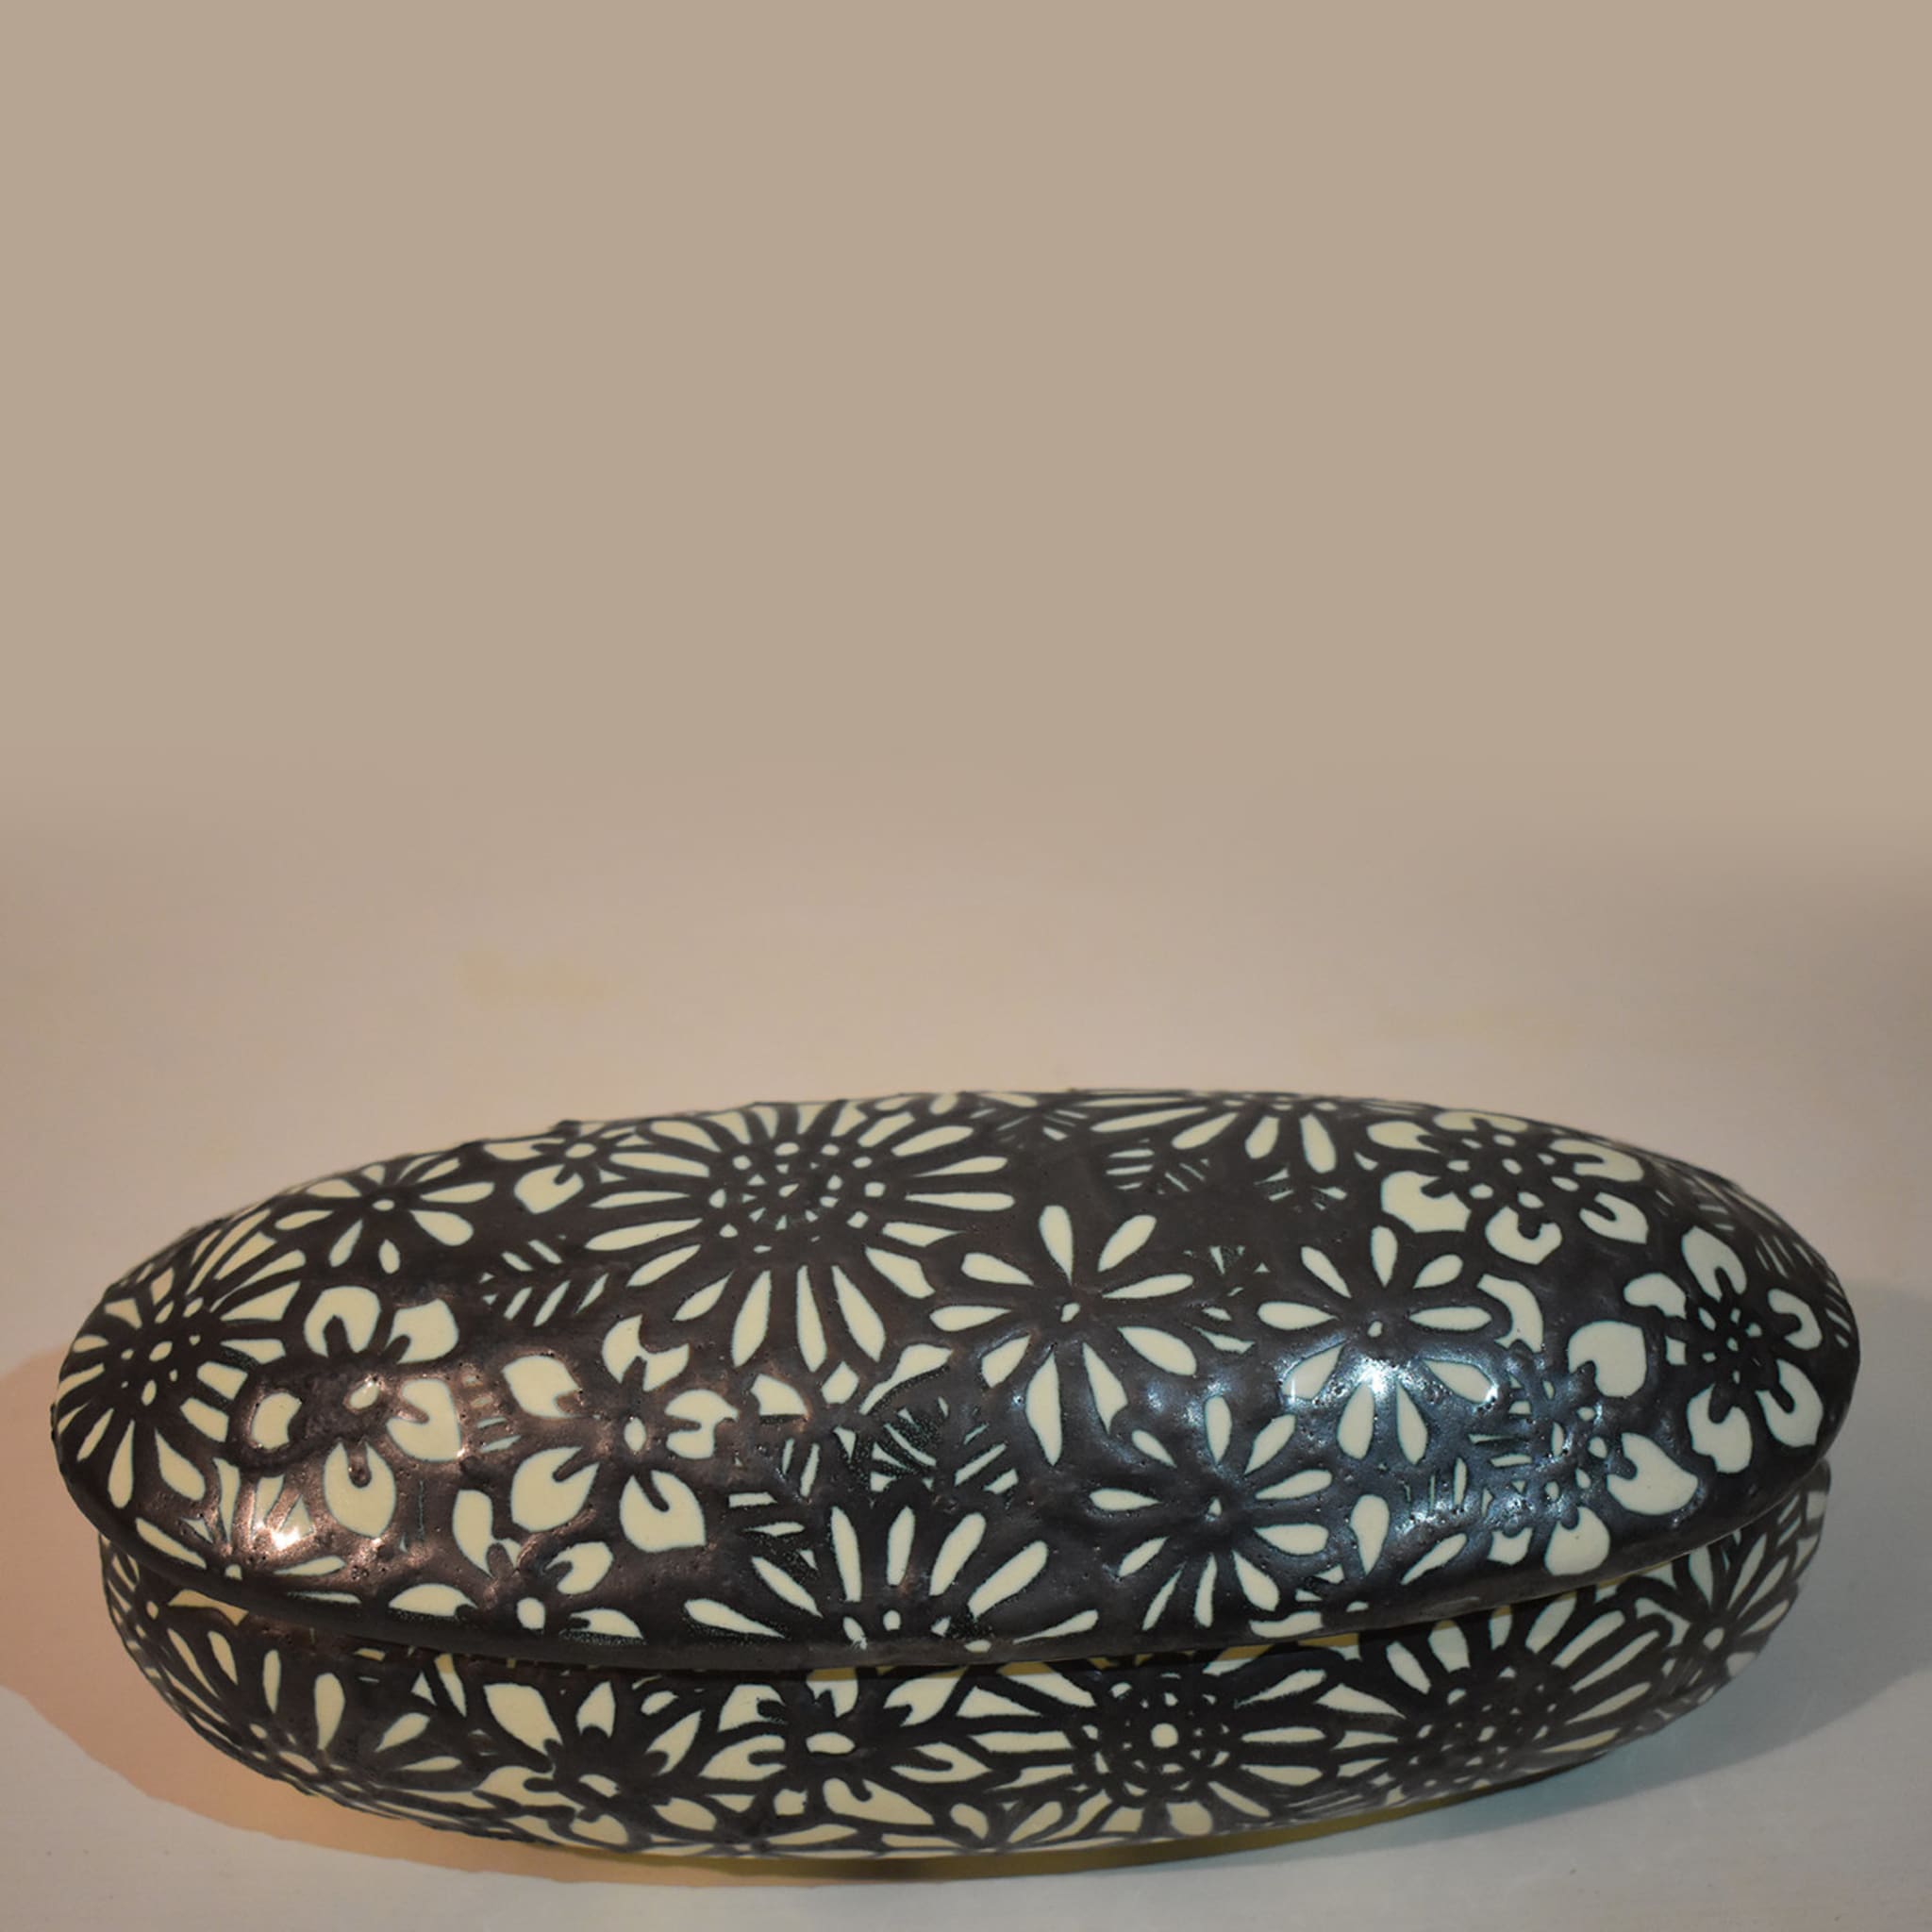 Oval Box with Flowers - Alternative view 1